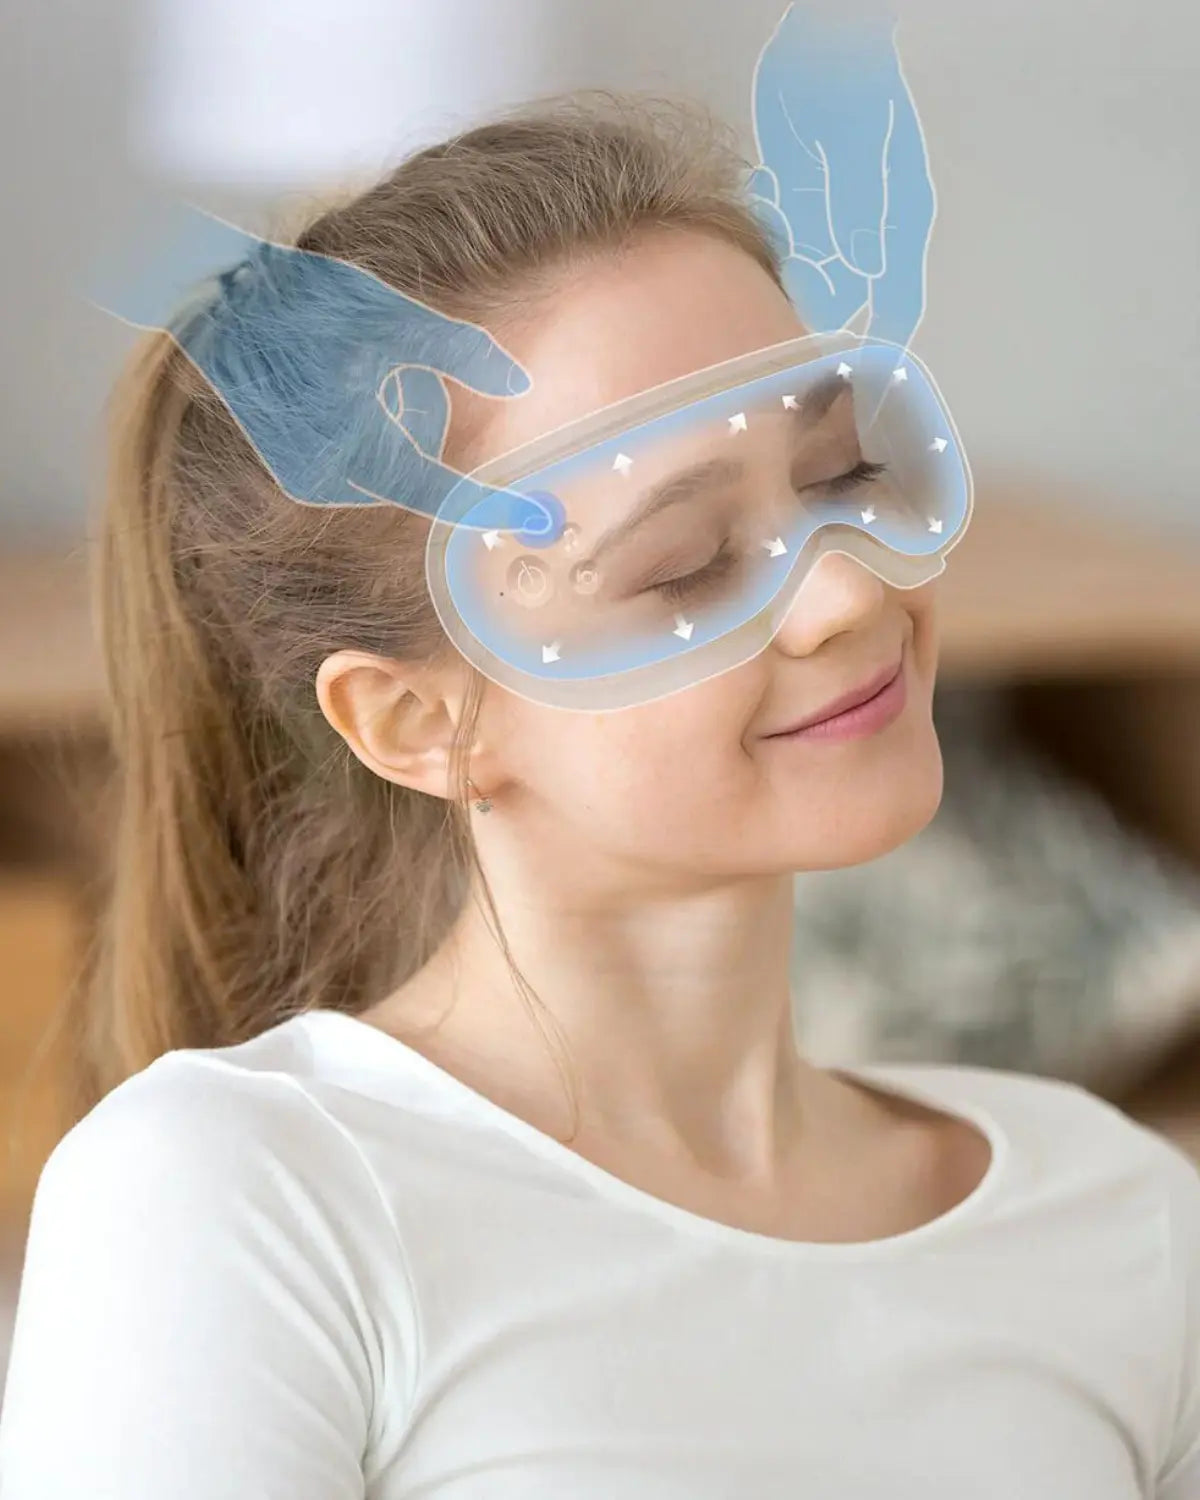 A young woman with long hair in a ponytail wears a white shirt and a relaxed smile while sitting indoors. She is wearing the Renpho EU Eyeris 1 Eye Massager, illustrated with blue massage hands applying gentle pressure to the mask’s surface, suggesting a soothing compression therapy to relieve eye strain.